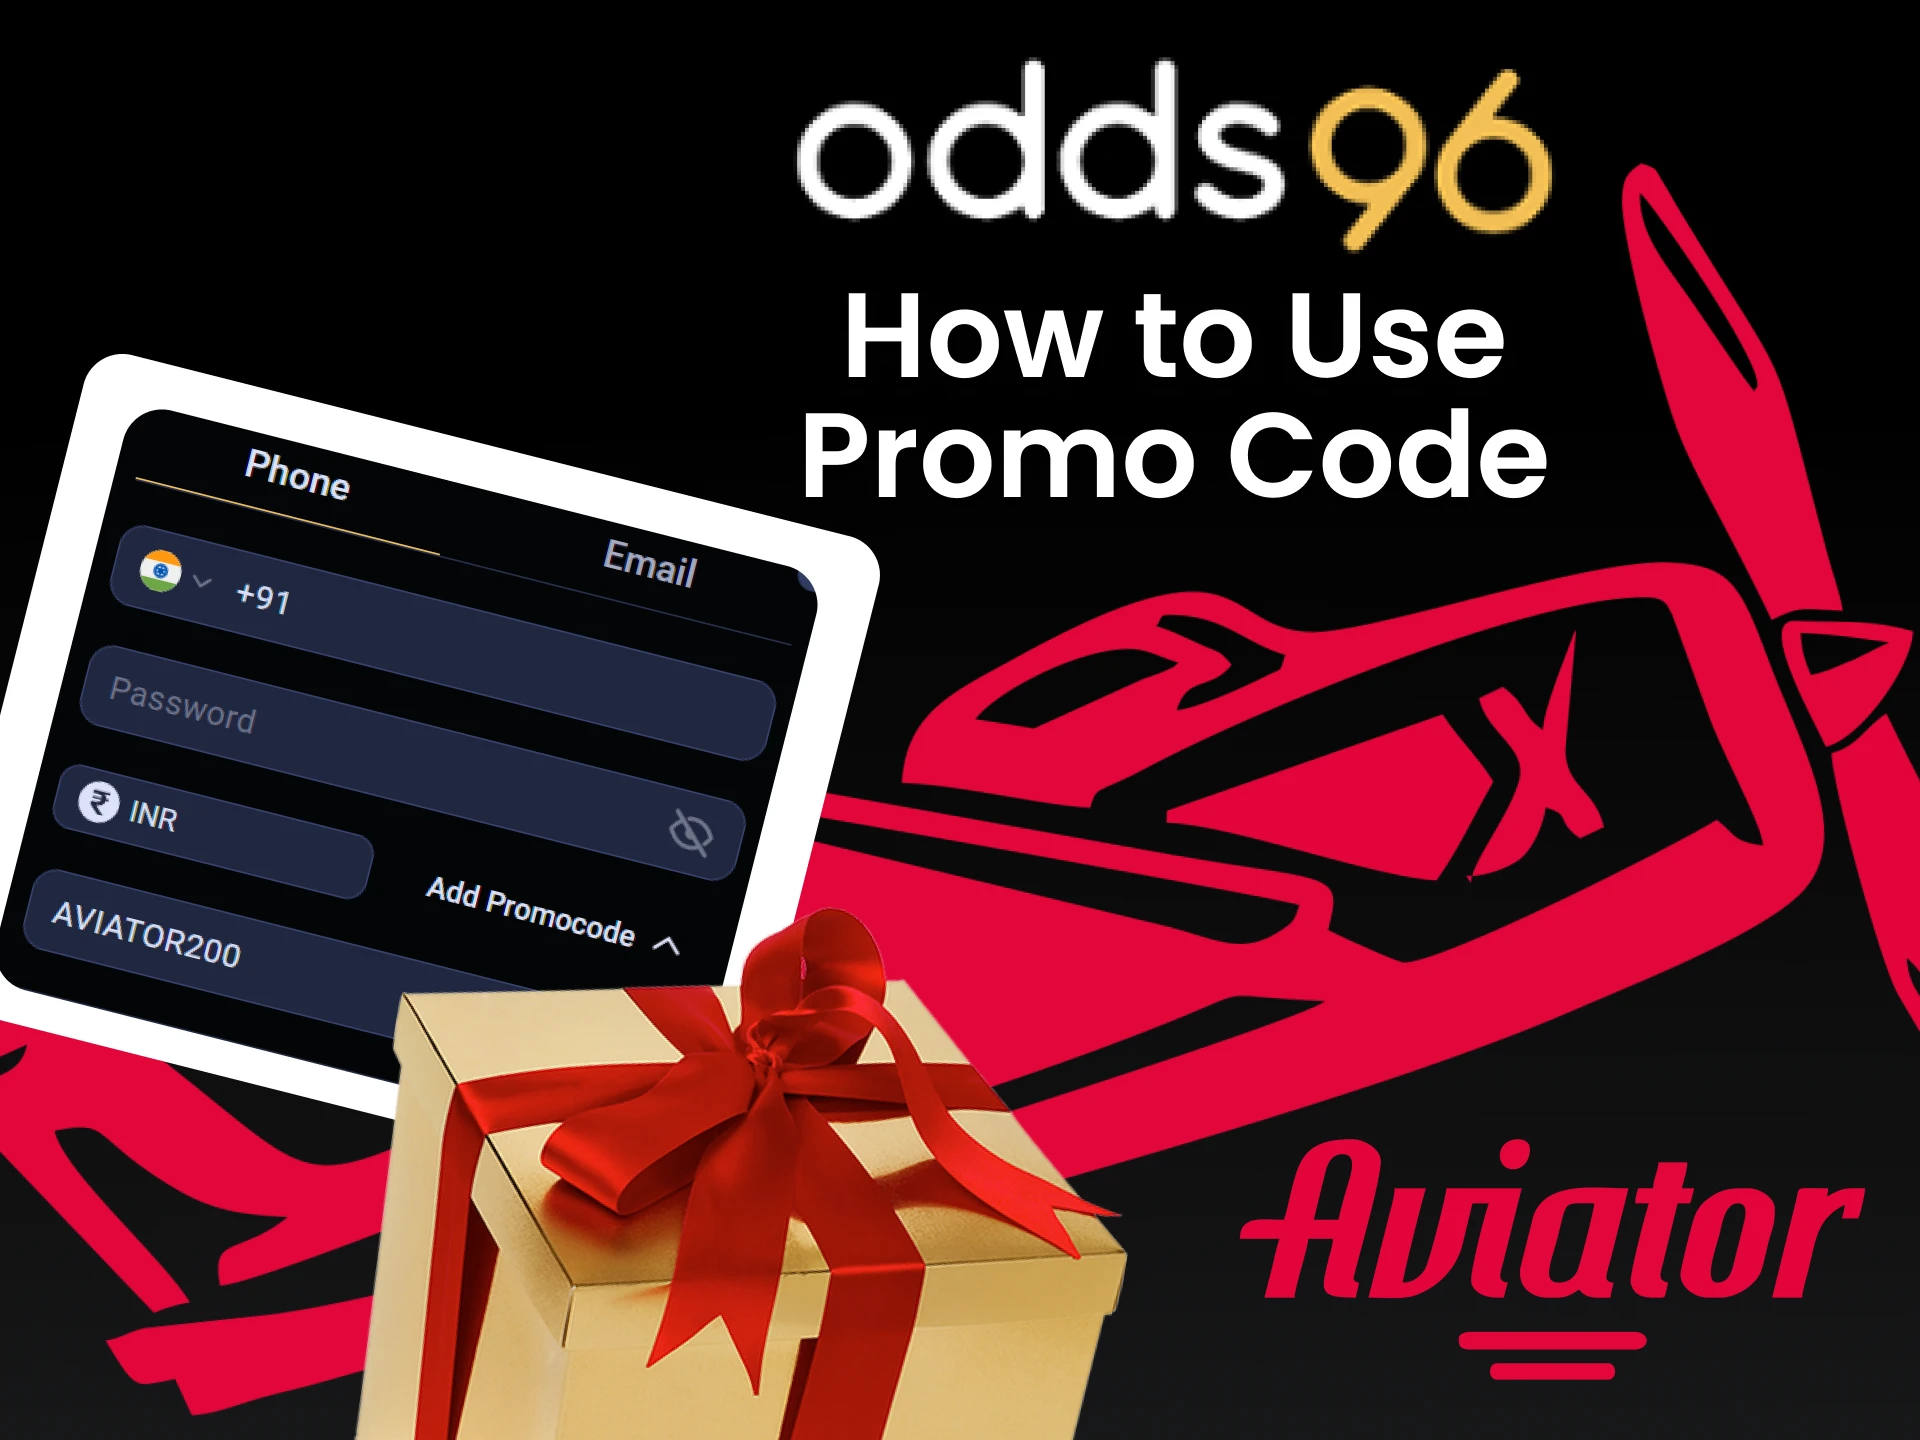 Learn how to apply and use a promo code for Aviator from Odds96.